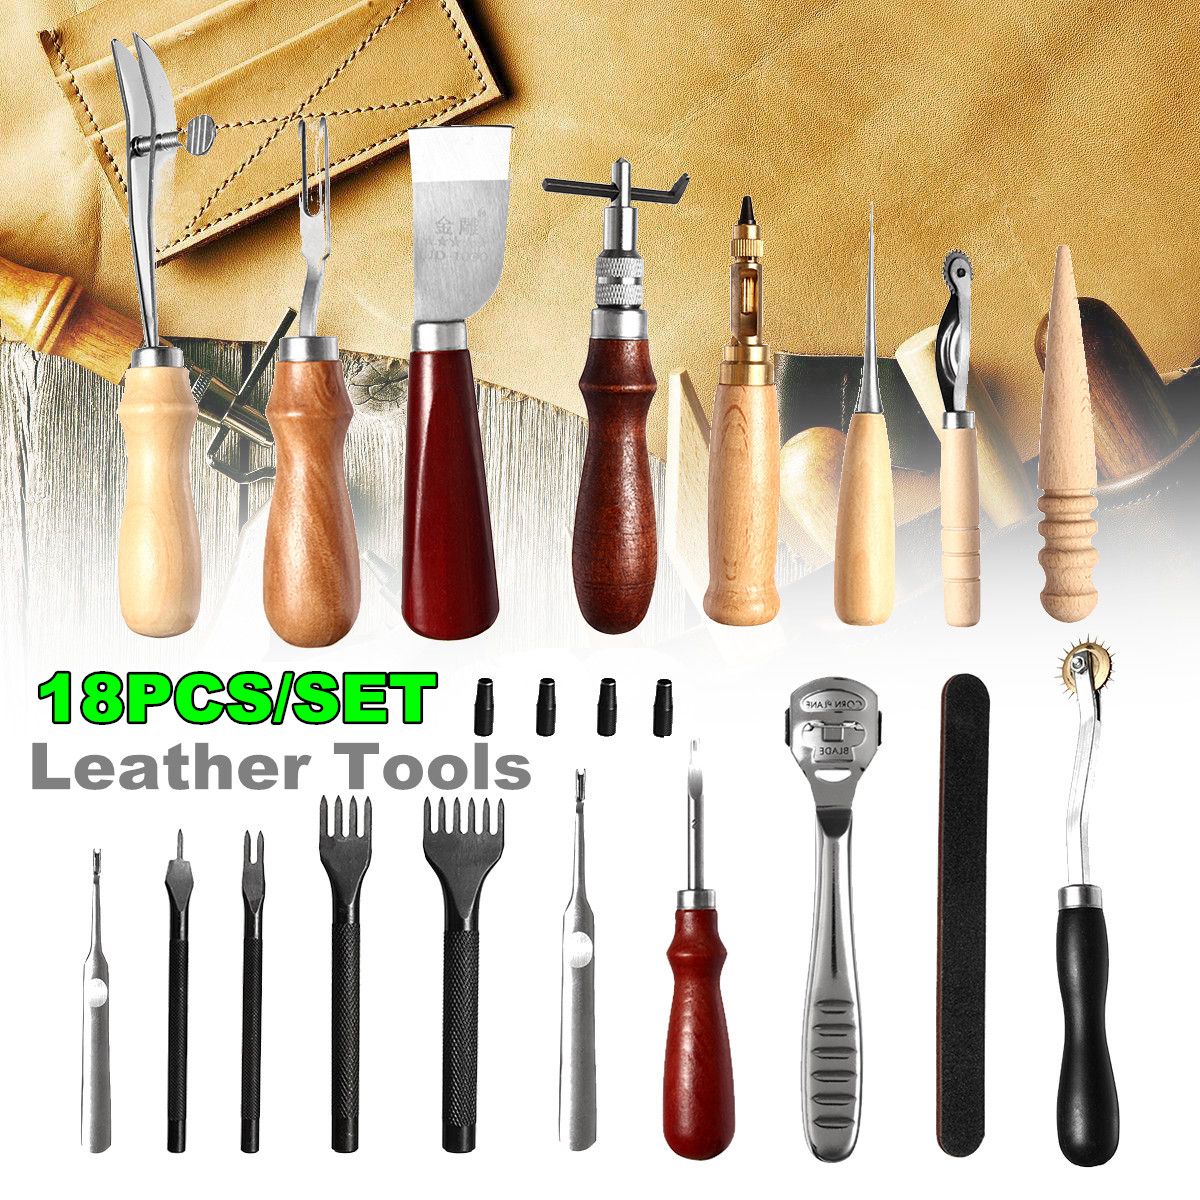 Leather-Craft-Tool-Kit-18pcs-Stitching-Carving-Working-Sewing-Saddle-Groover-Leather-Craft-DIY-Tool-1311436